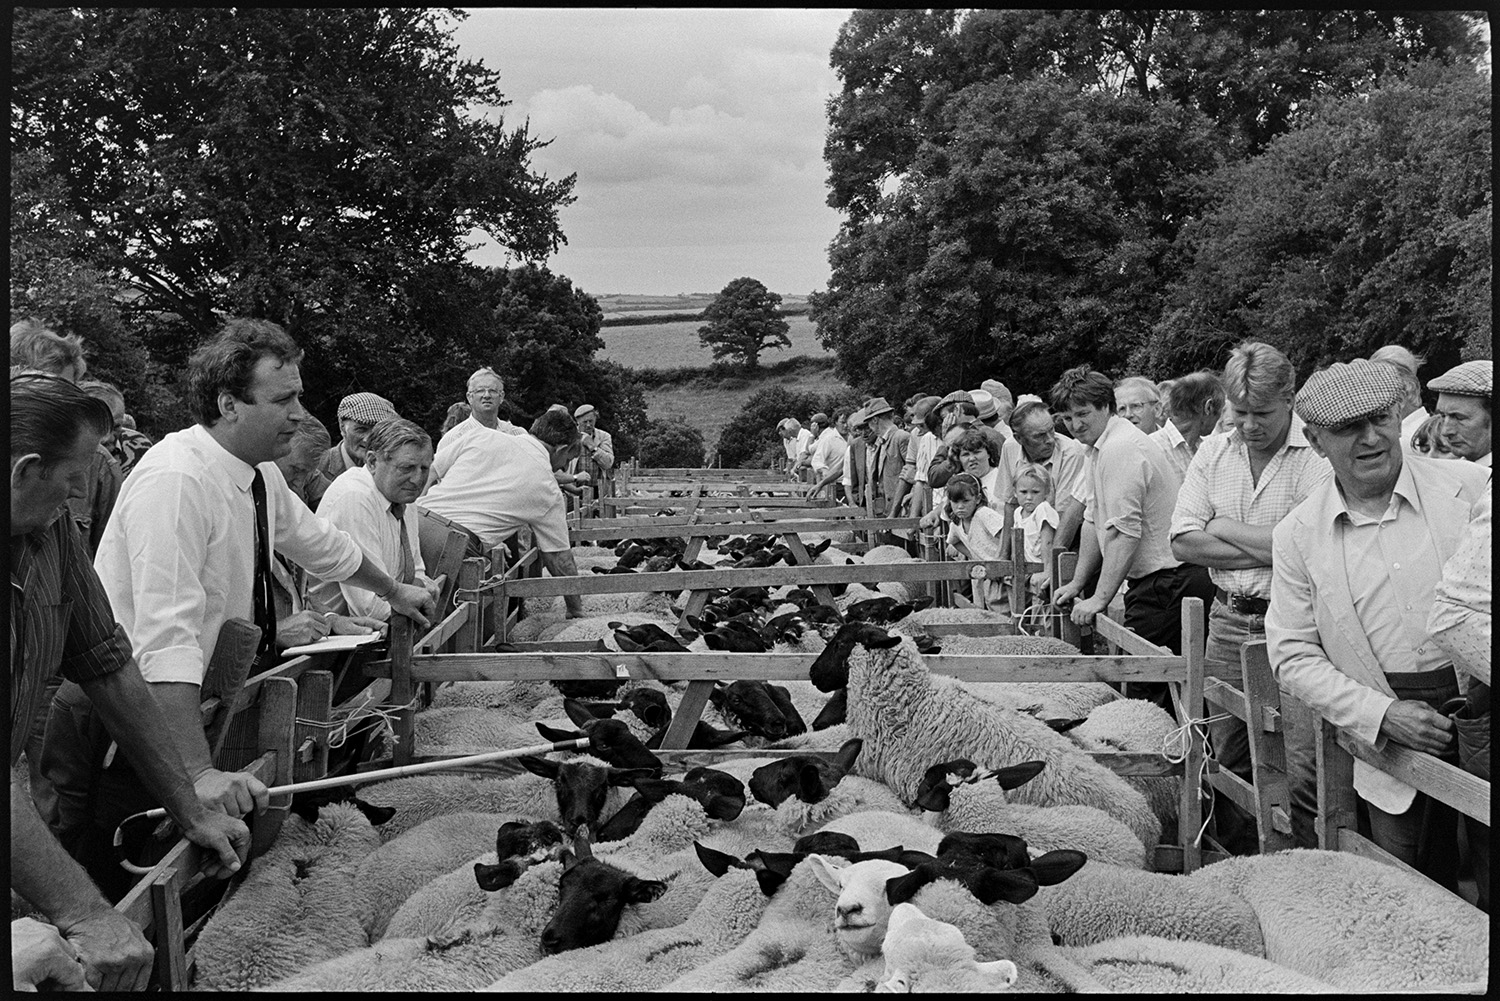 Fair, auction of sheep, farmers and crowds of spectators.
[A crowd of men, women and children standing around wooden pens of black-faced sheep being sold at Chulmleigh Fair. The auctioneer can be seen on the left, holding a stick, with his clerk writing on a clipboard.]